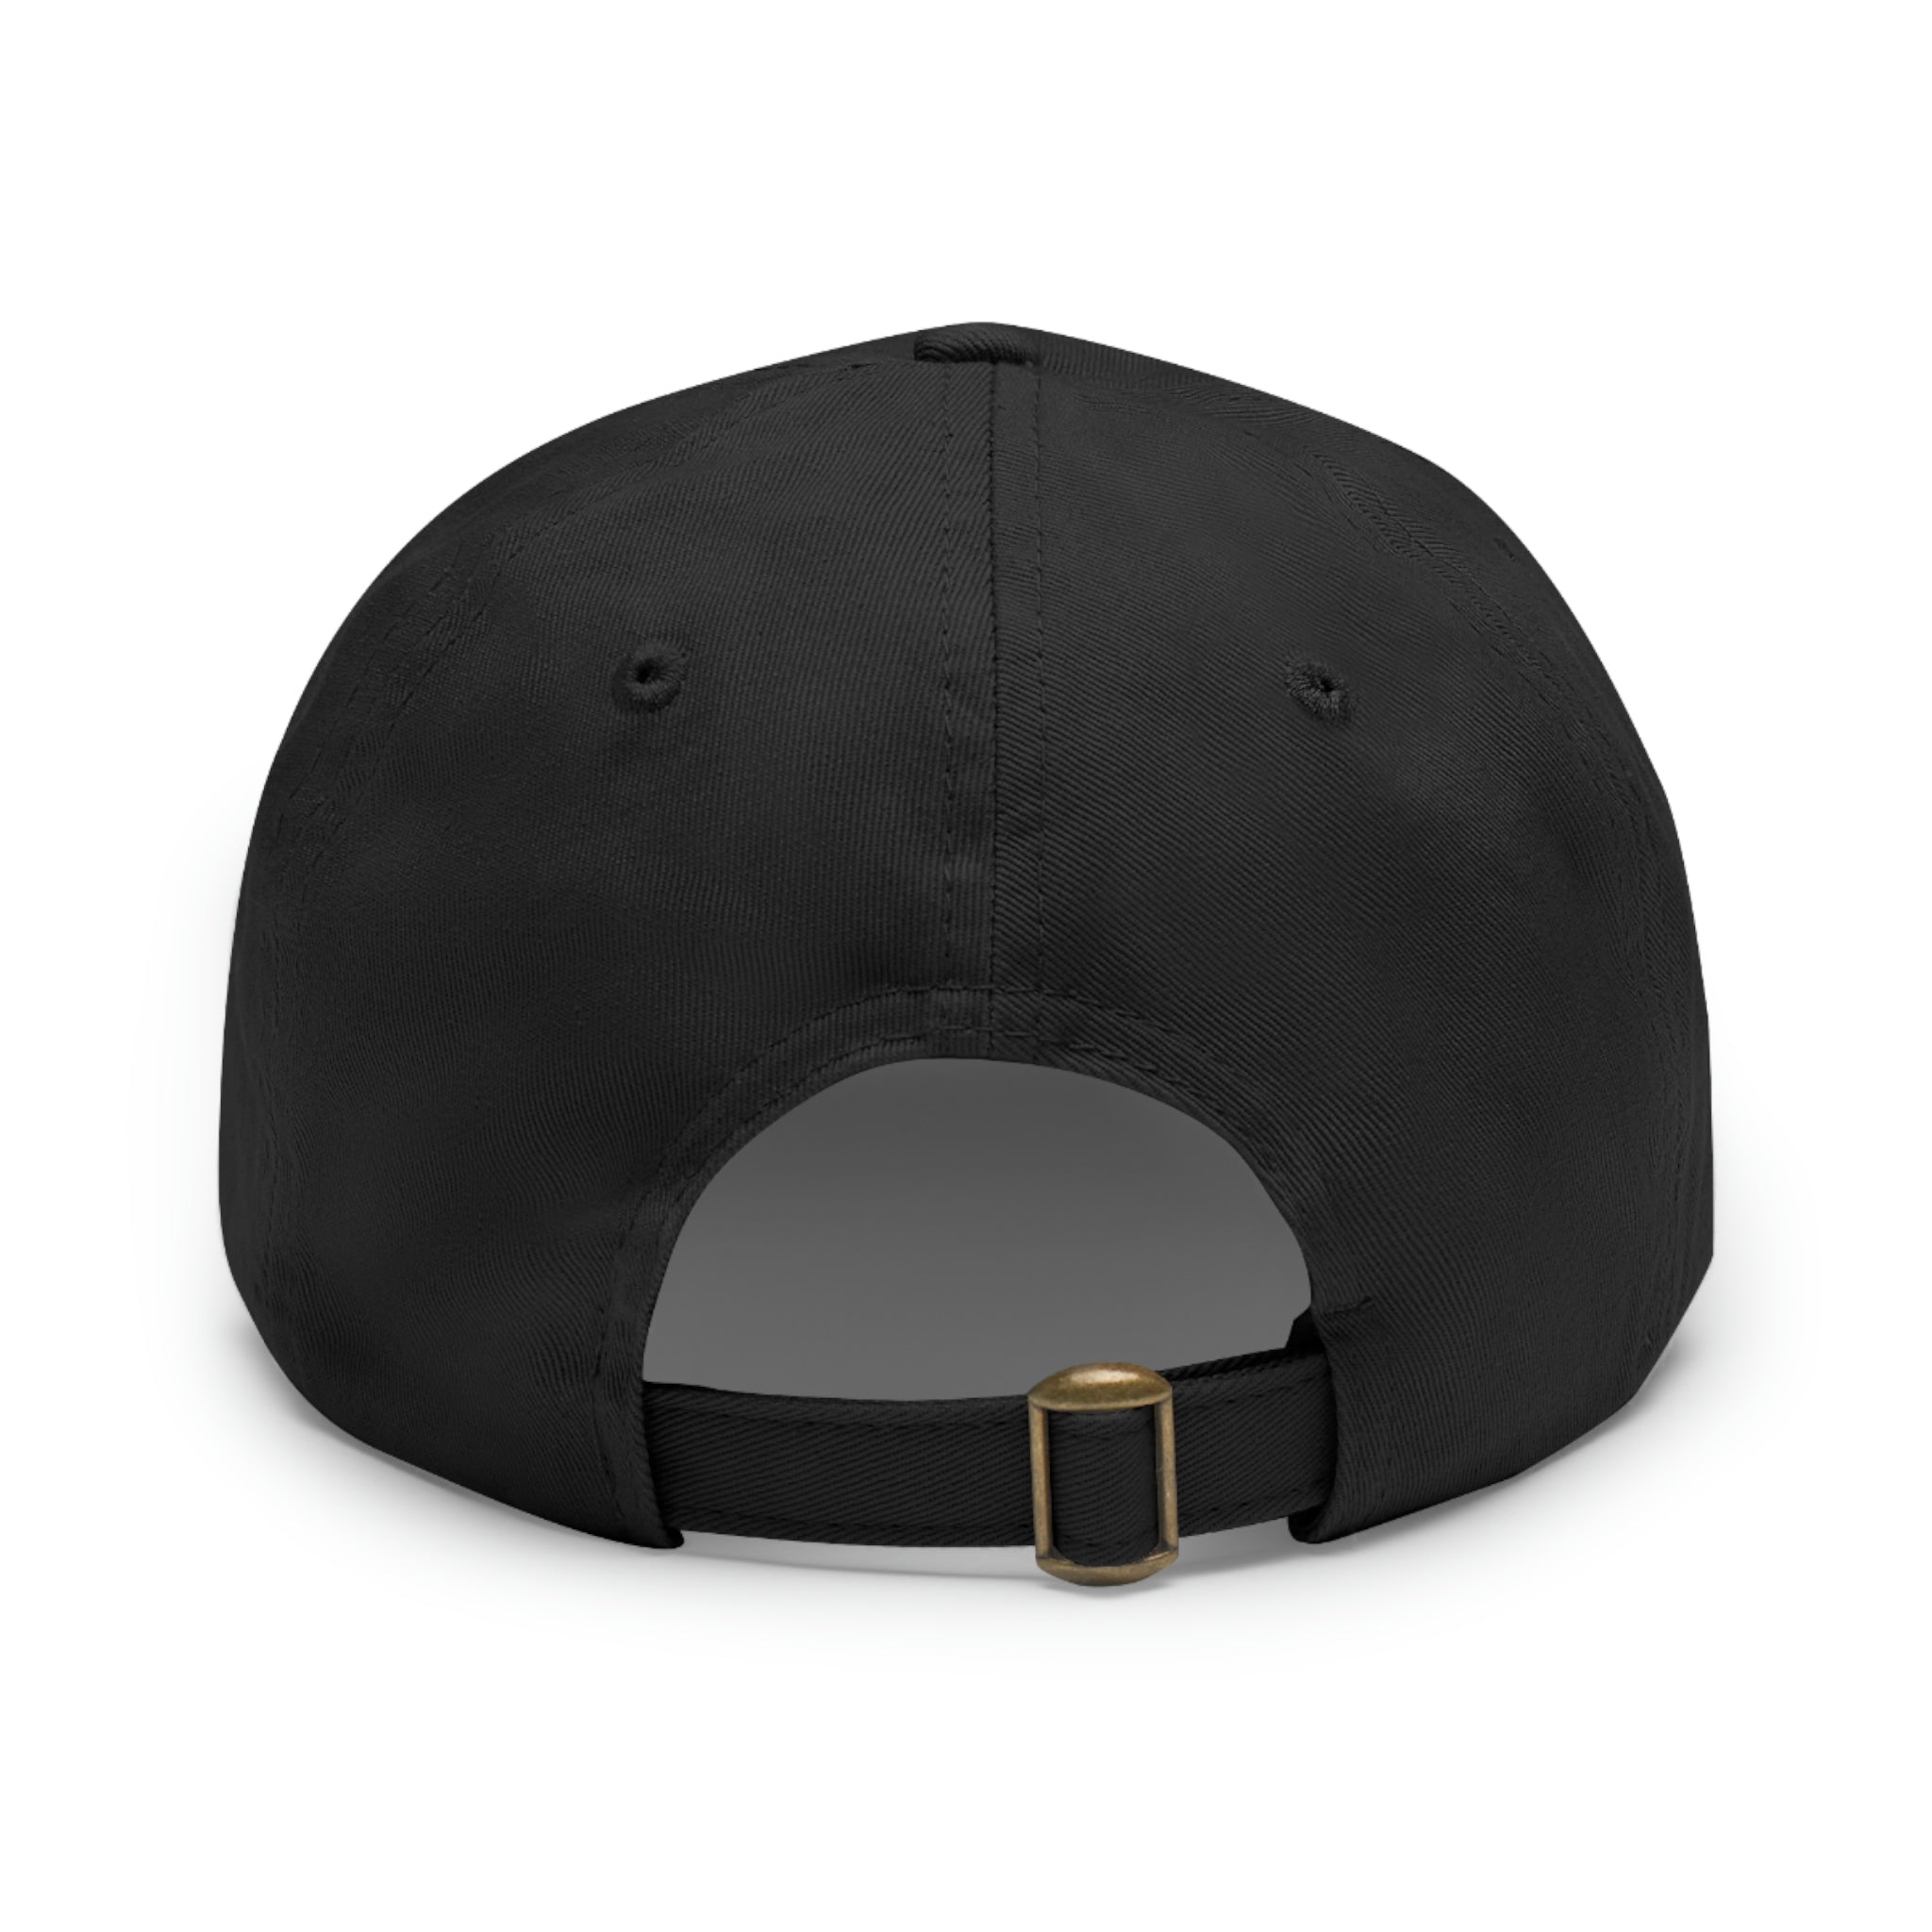 B.O.S.S. Logo Hat with Leather Patch